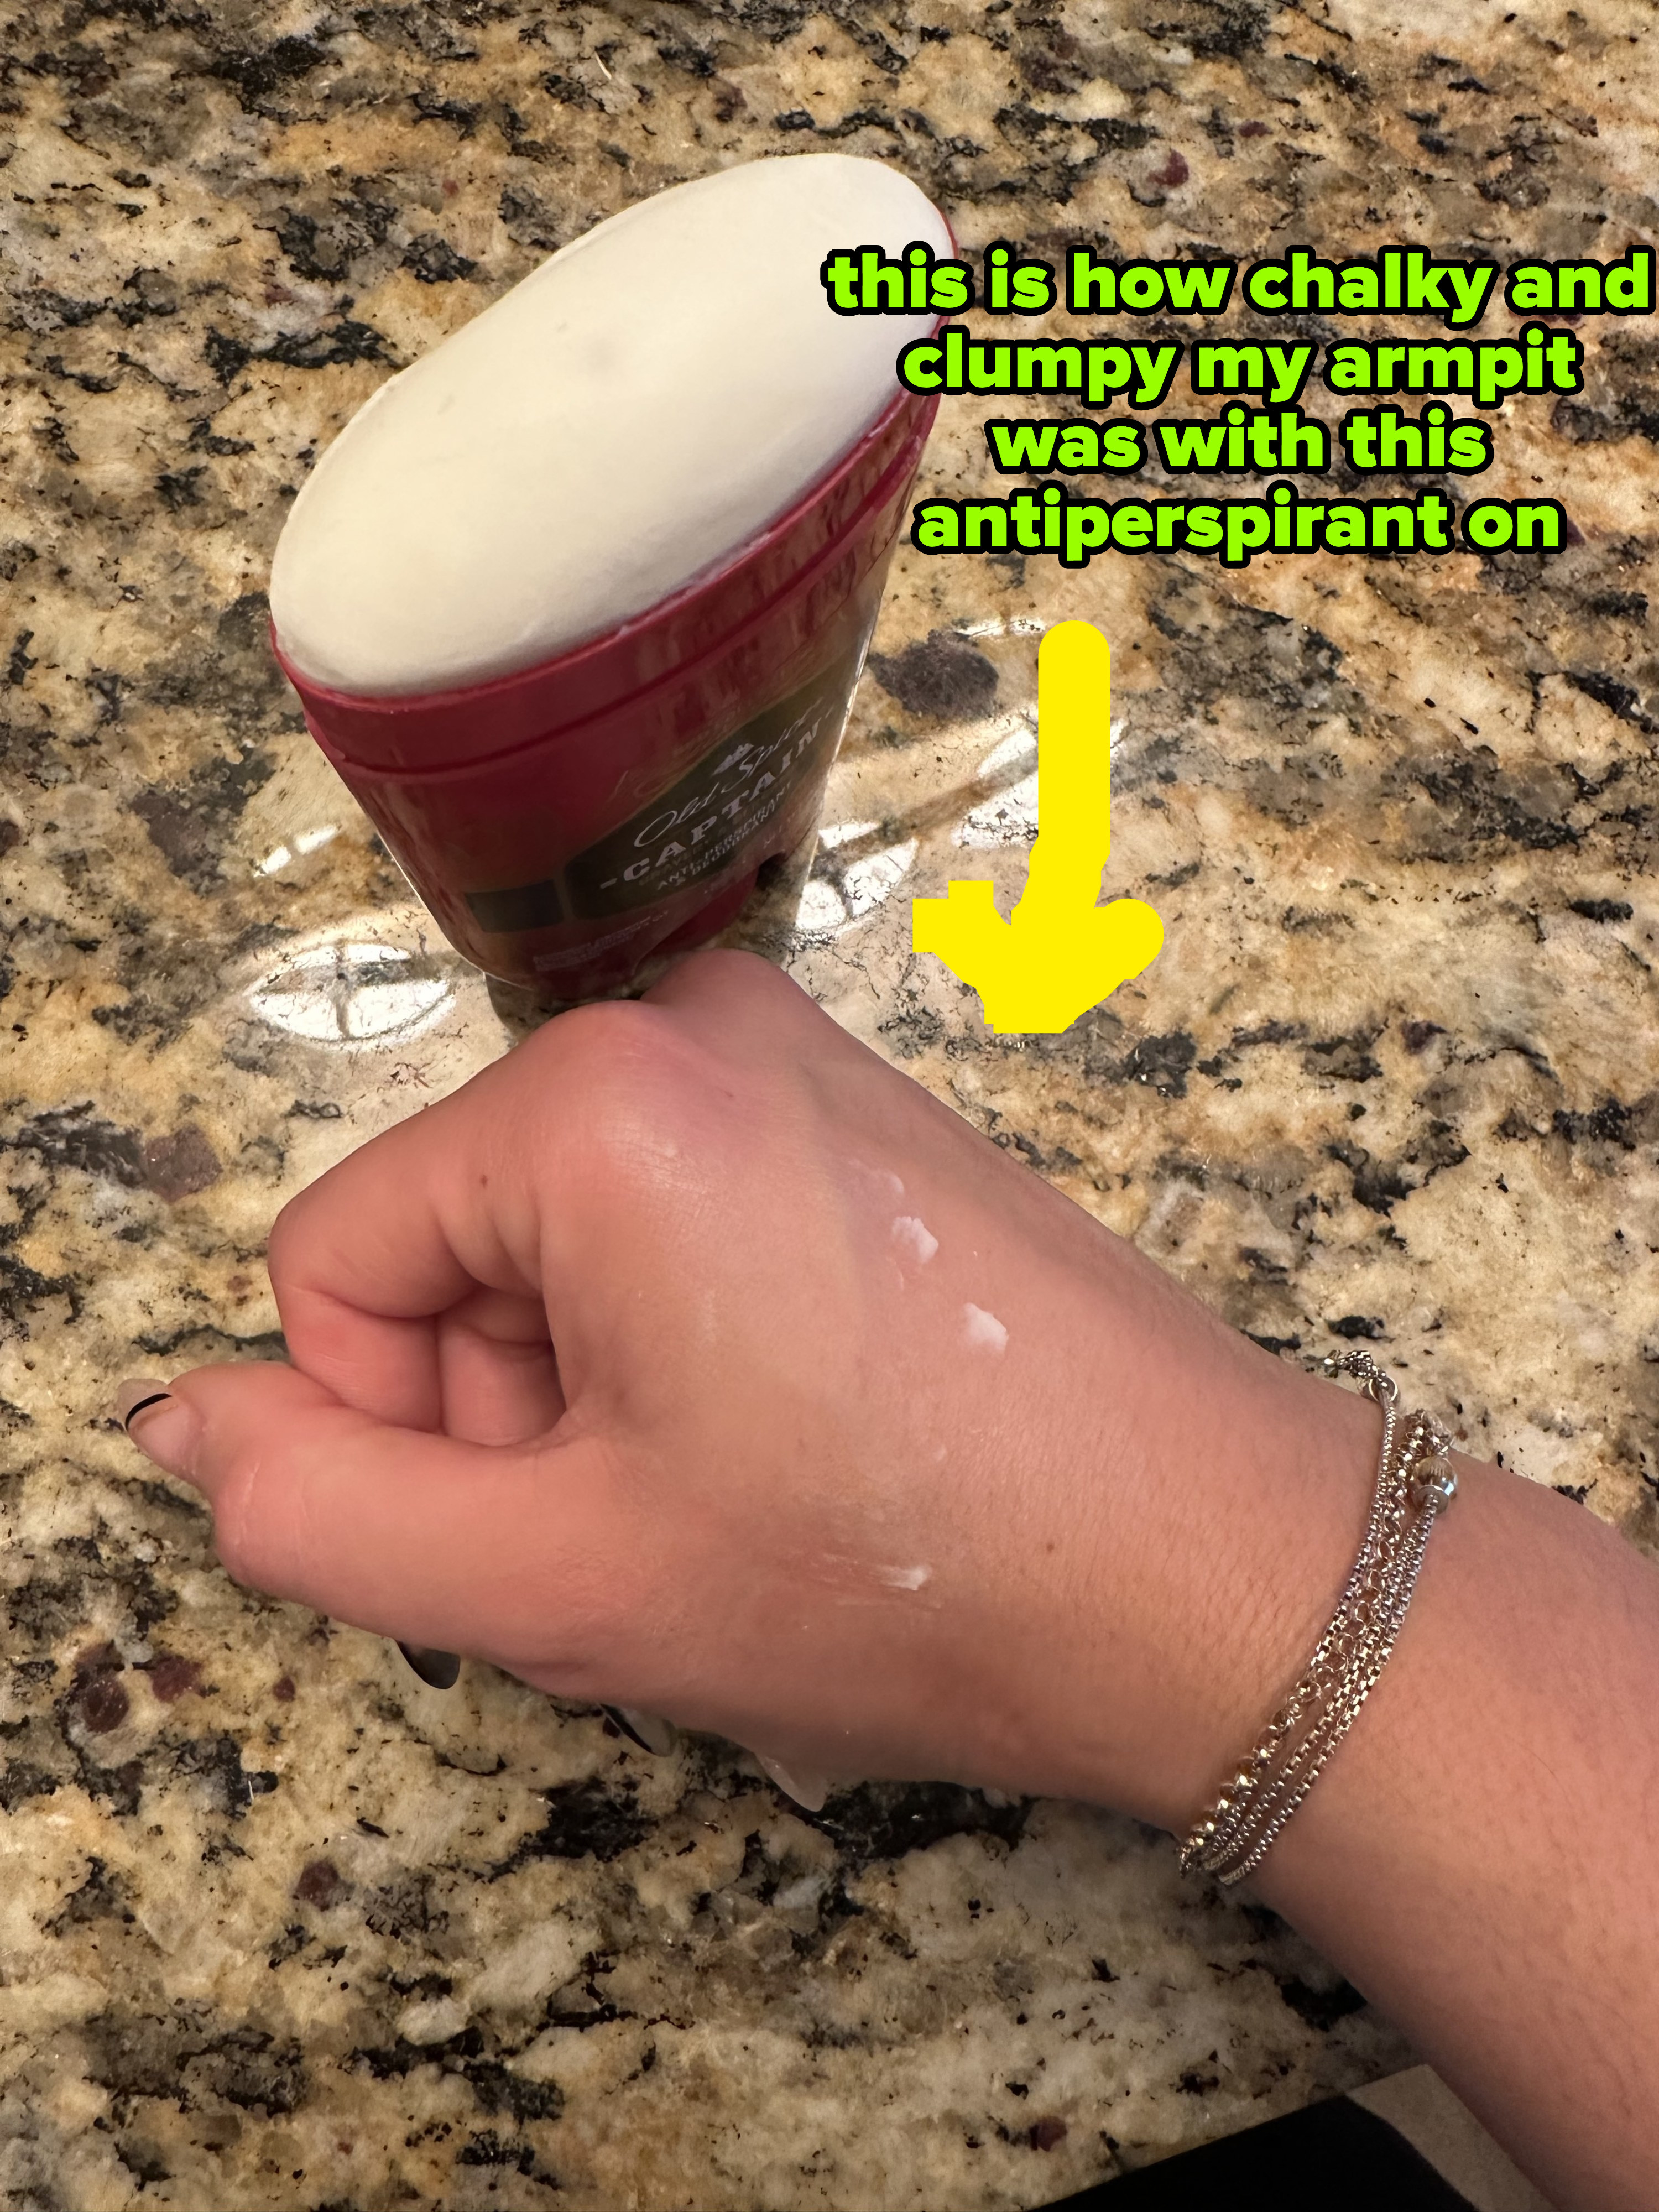 the clump of applied deodorant on the author&#x27;s hand